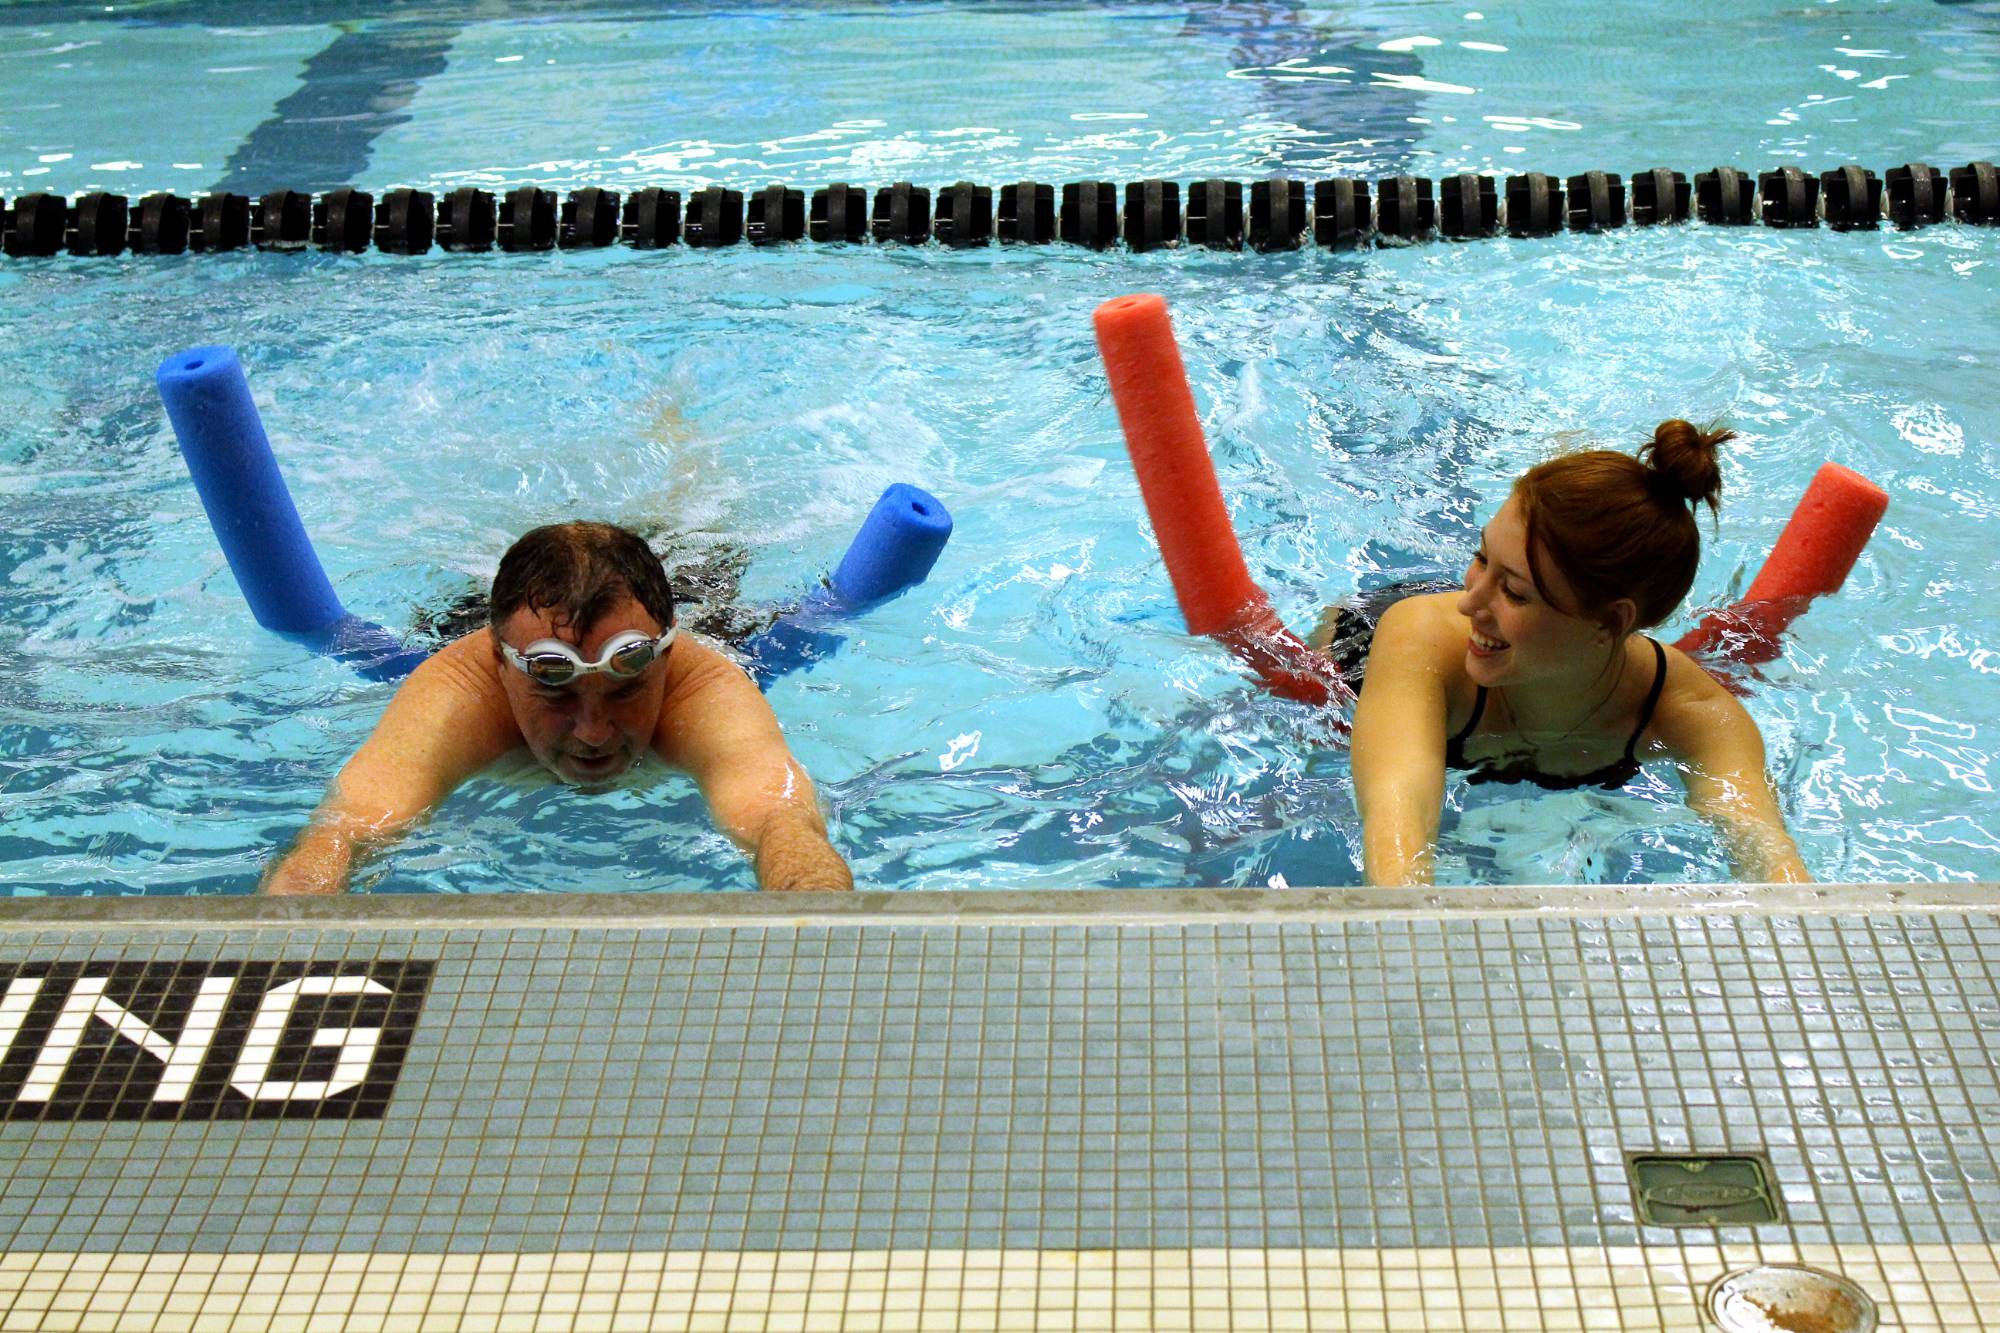 Participant and Swim instructor in the pool on noodles practicing kicks.